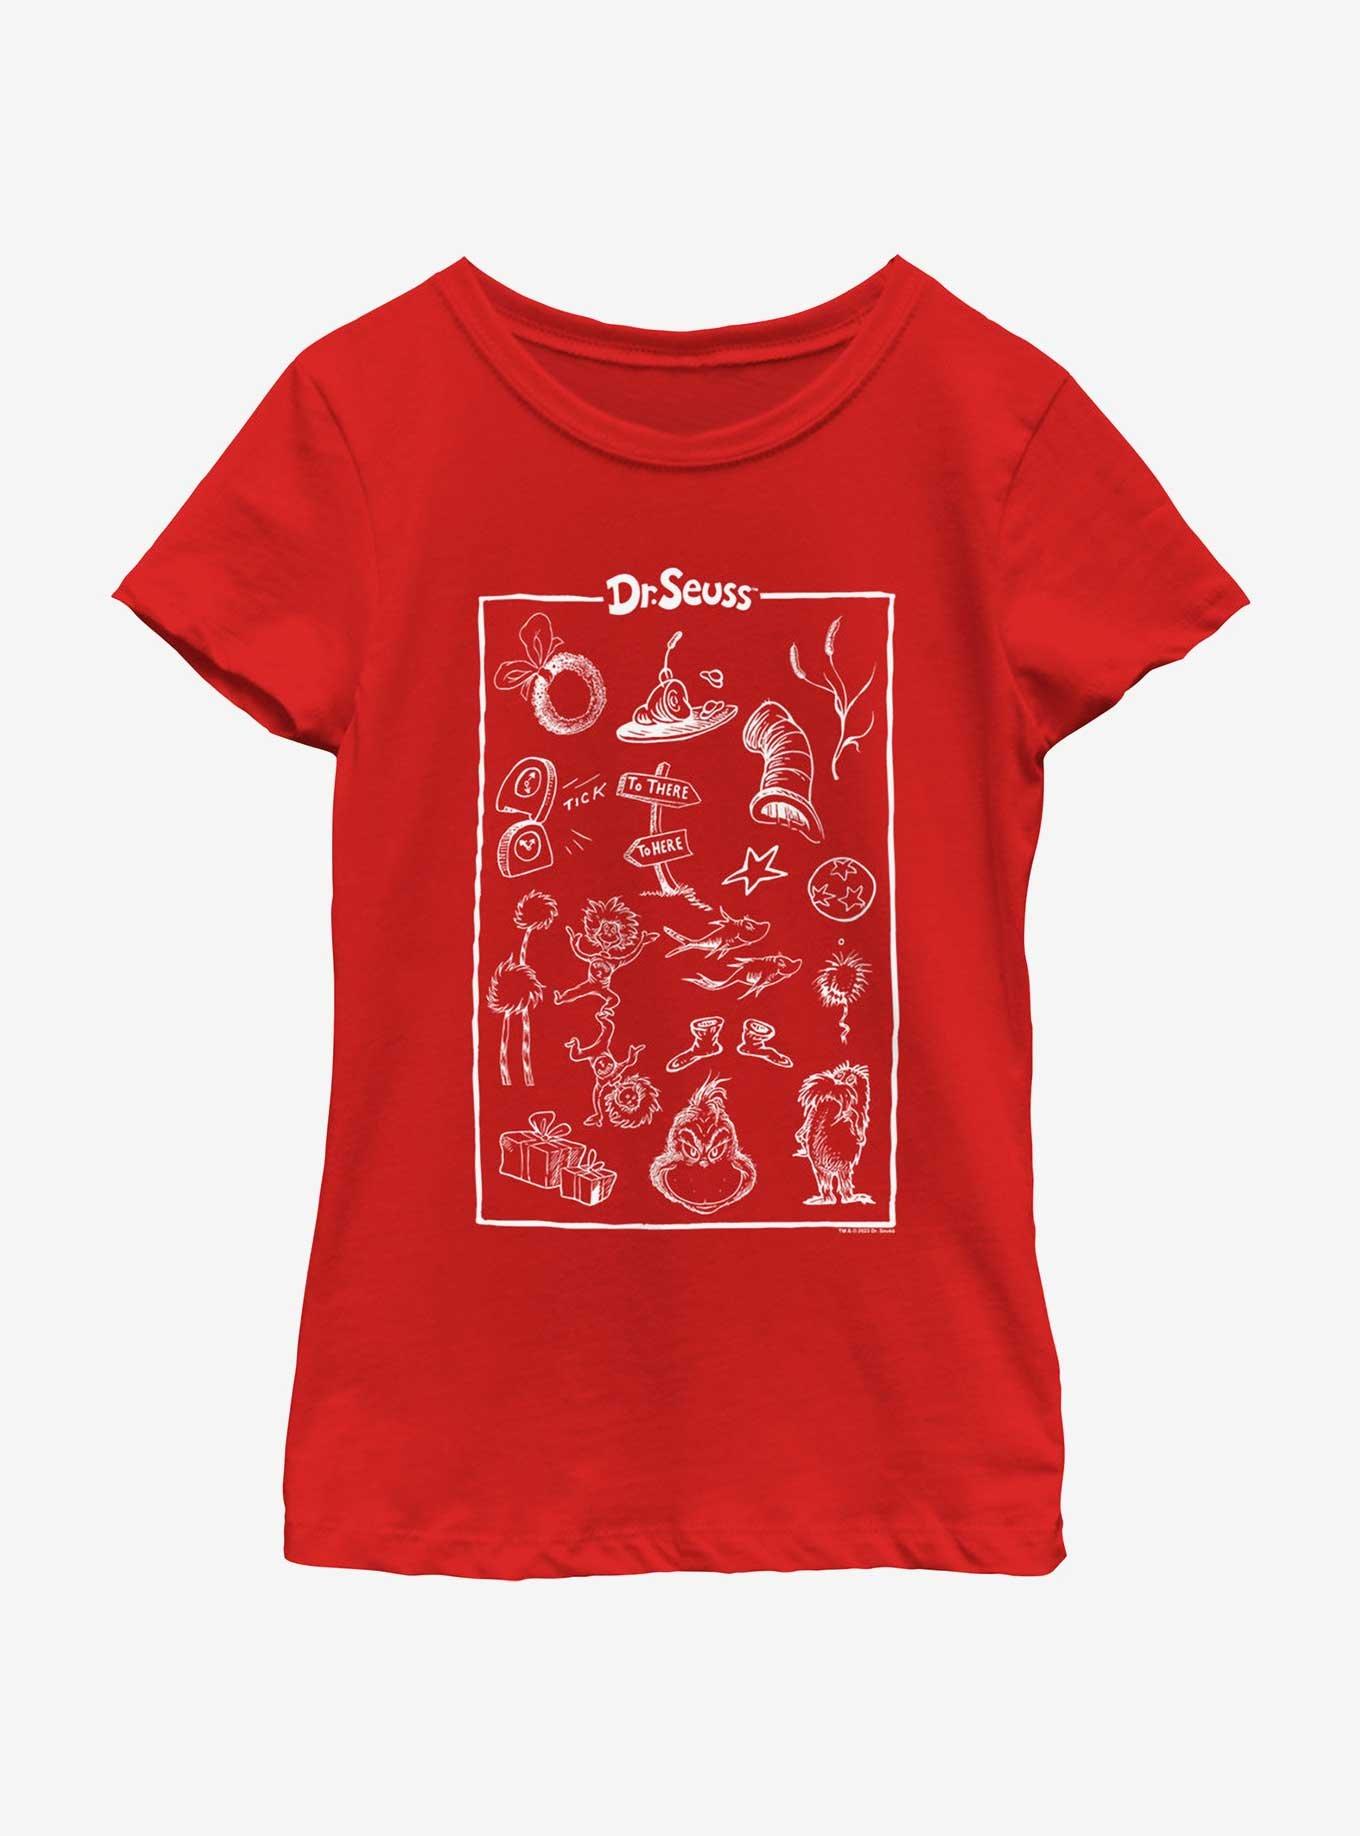 Dr. Seuss Collection Youth Girls T-Shirt, RED, hi-res